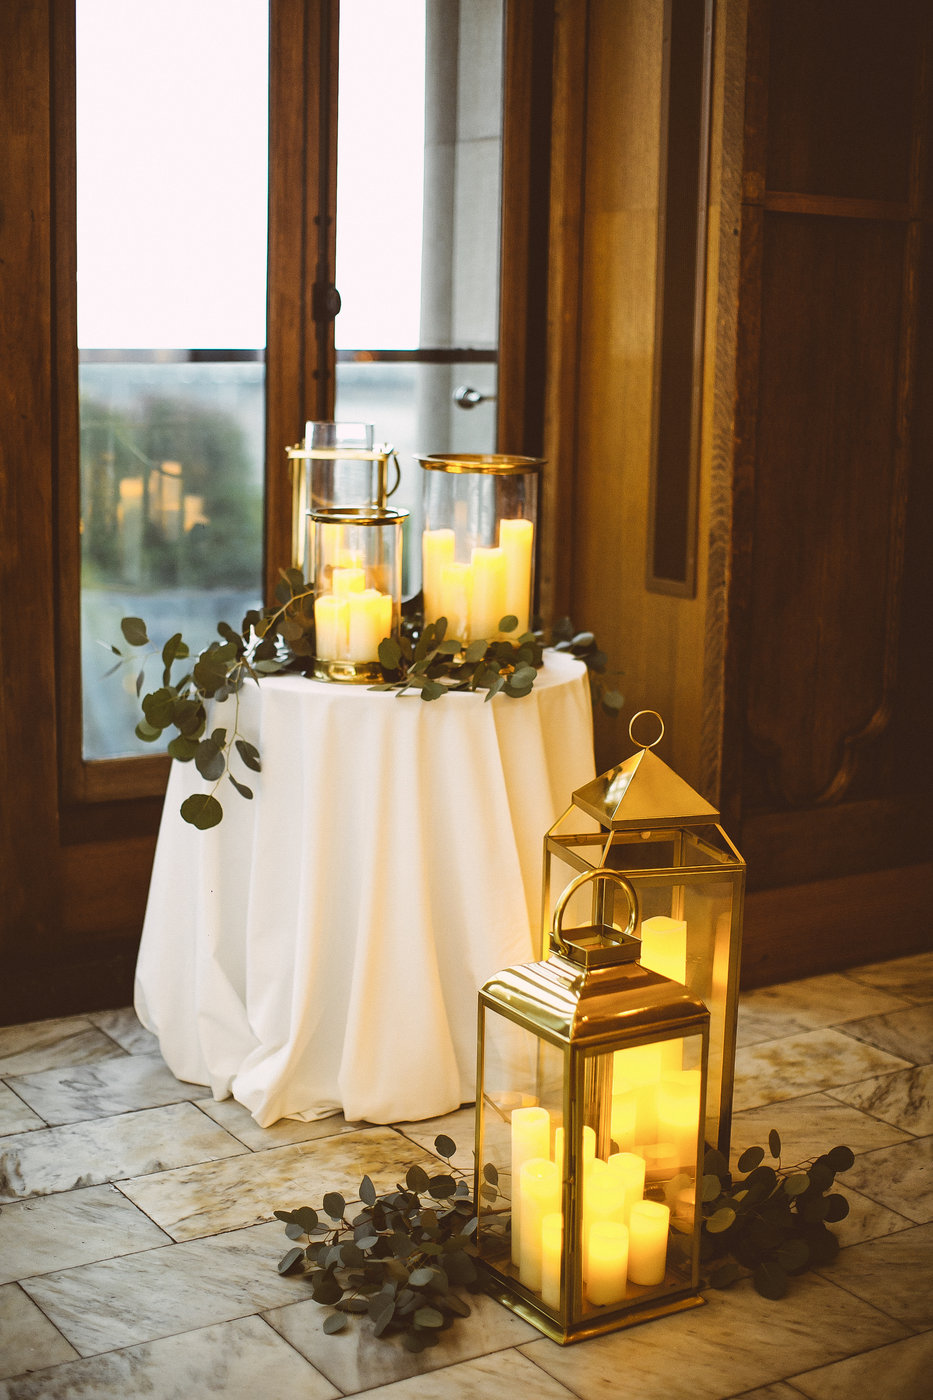 Ceremony details of brass lanterns with sprigs of eucalyptus for a class wedding at Chicago Athletic Association.